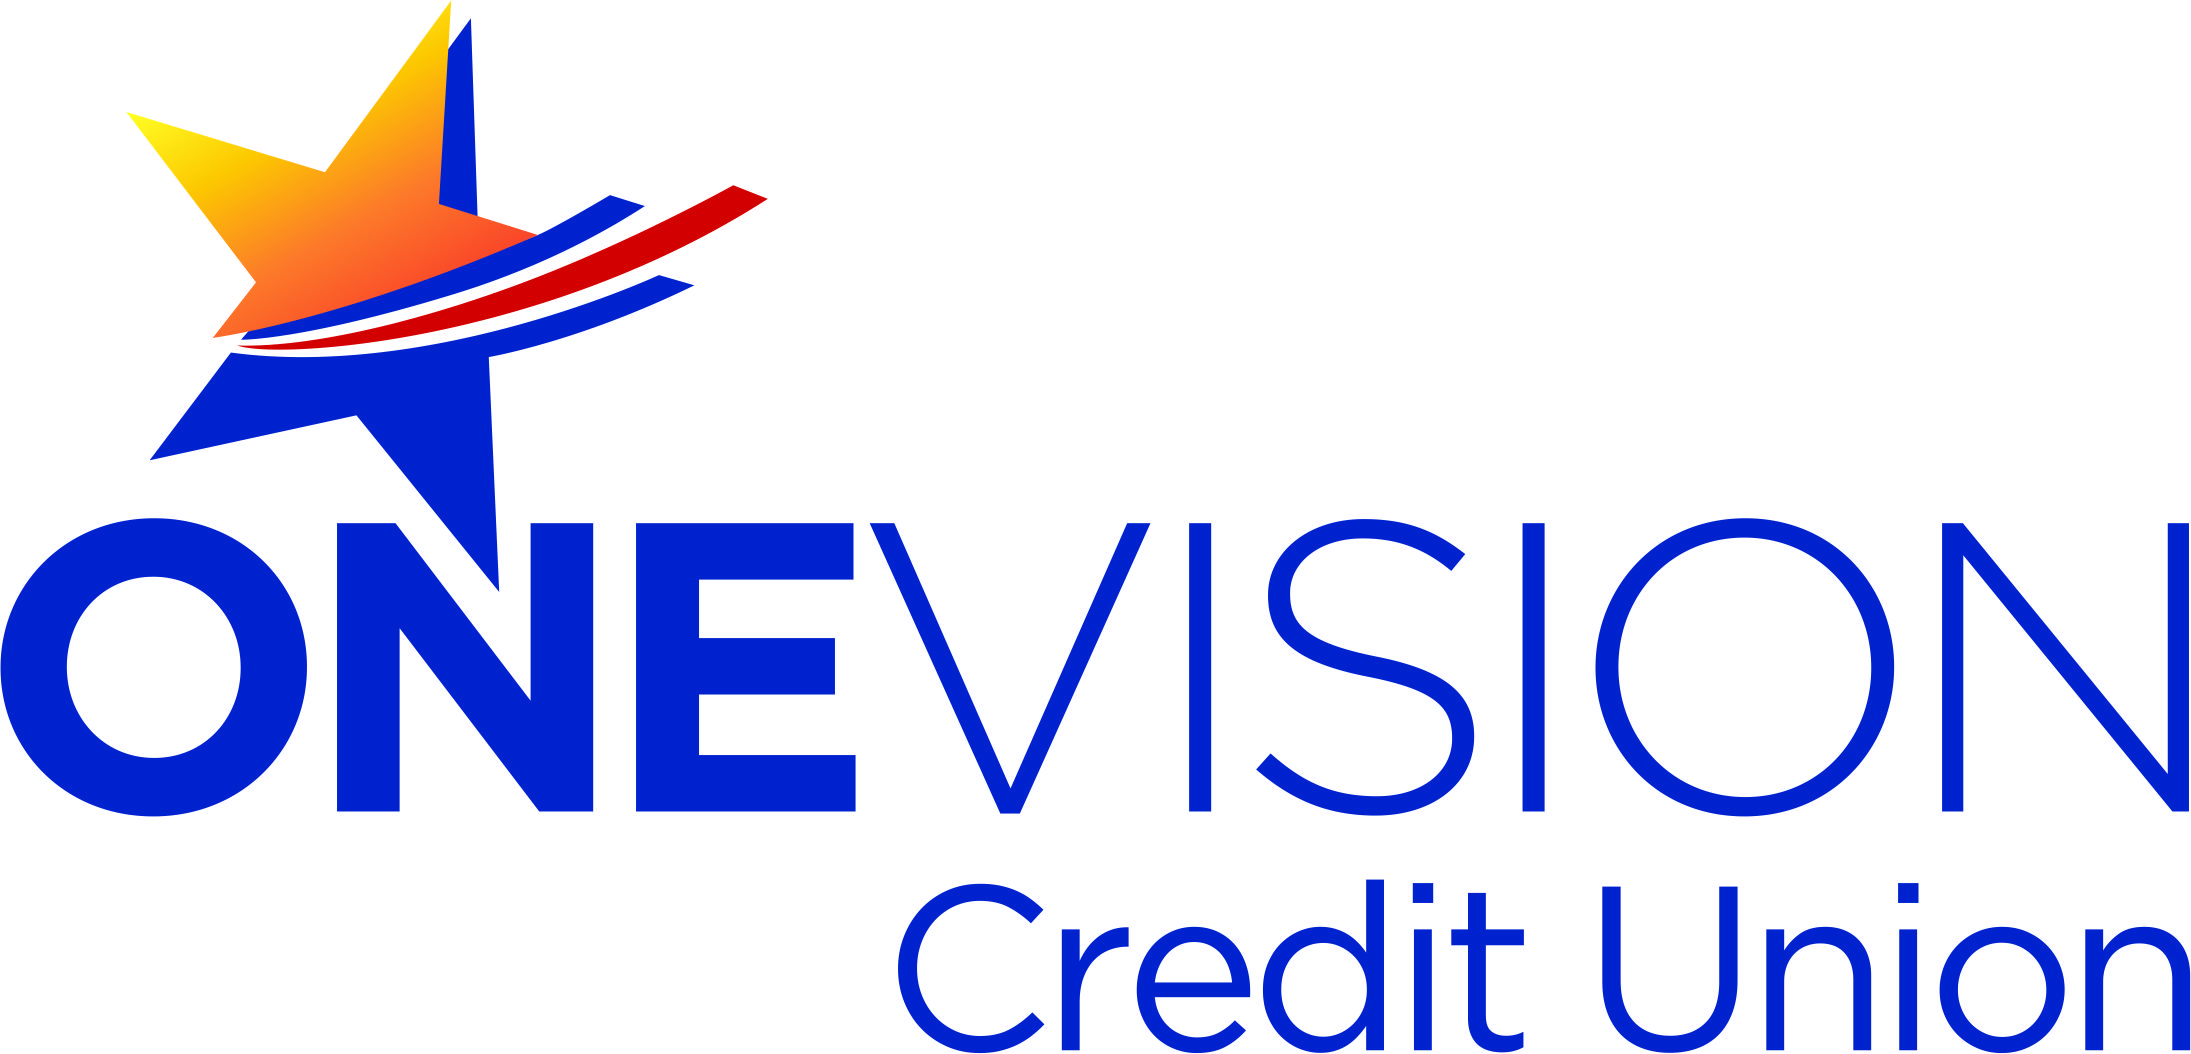 One Vision Credit Union | See Banking Differently